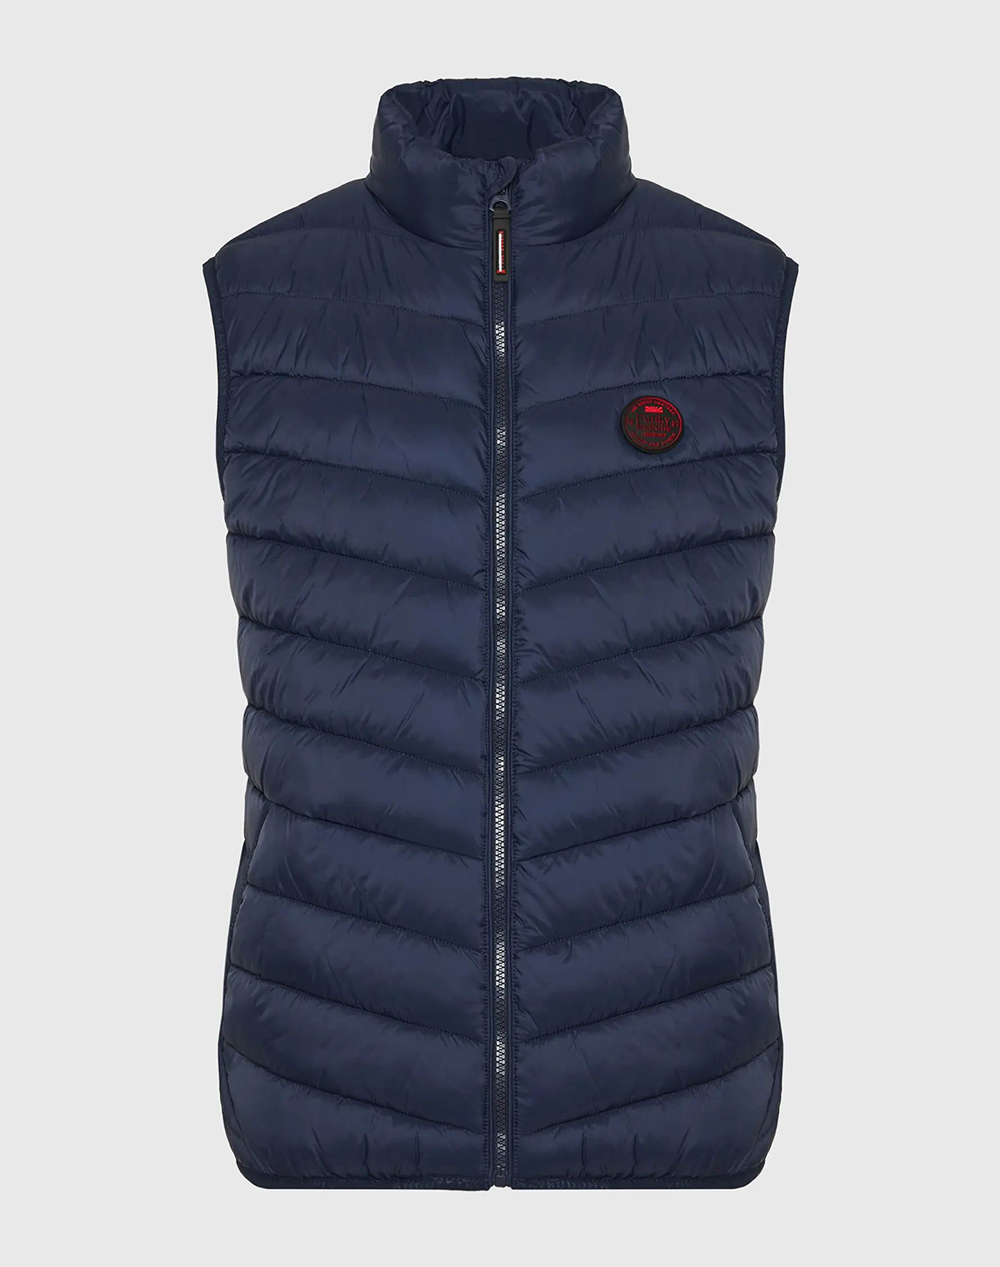 FUNKY BUDDHA Mens sleeveless quilted jacket